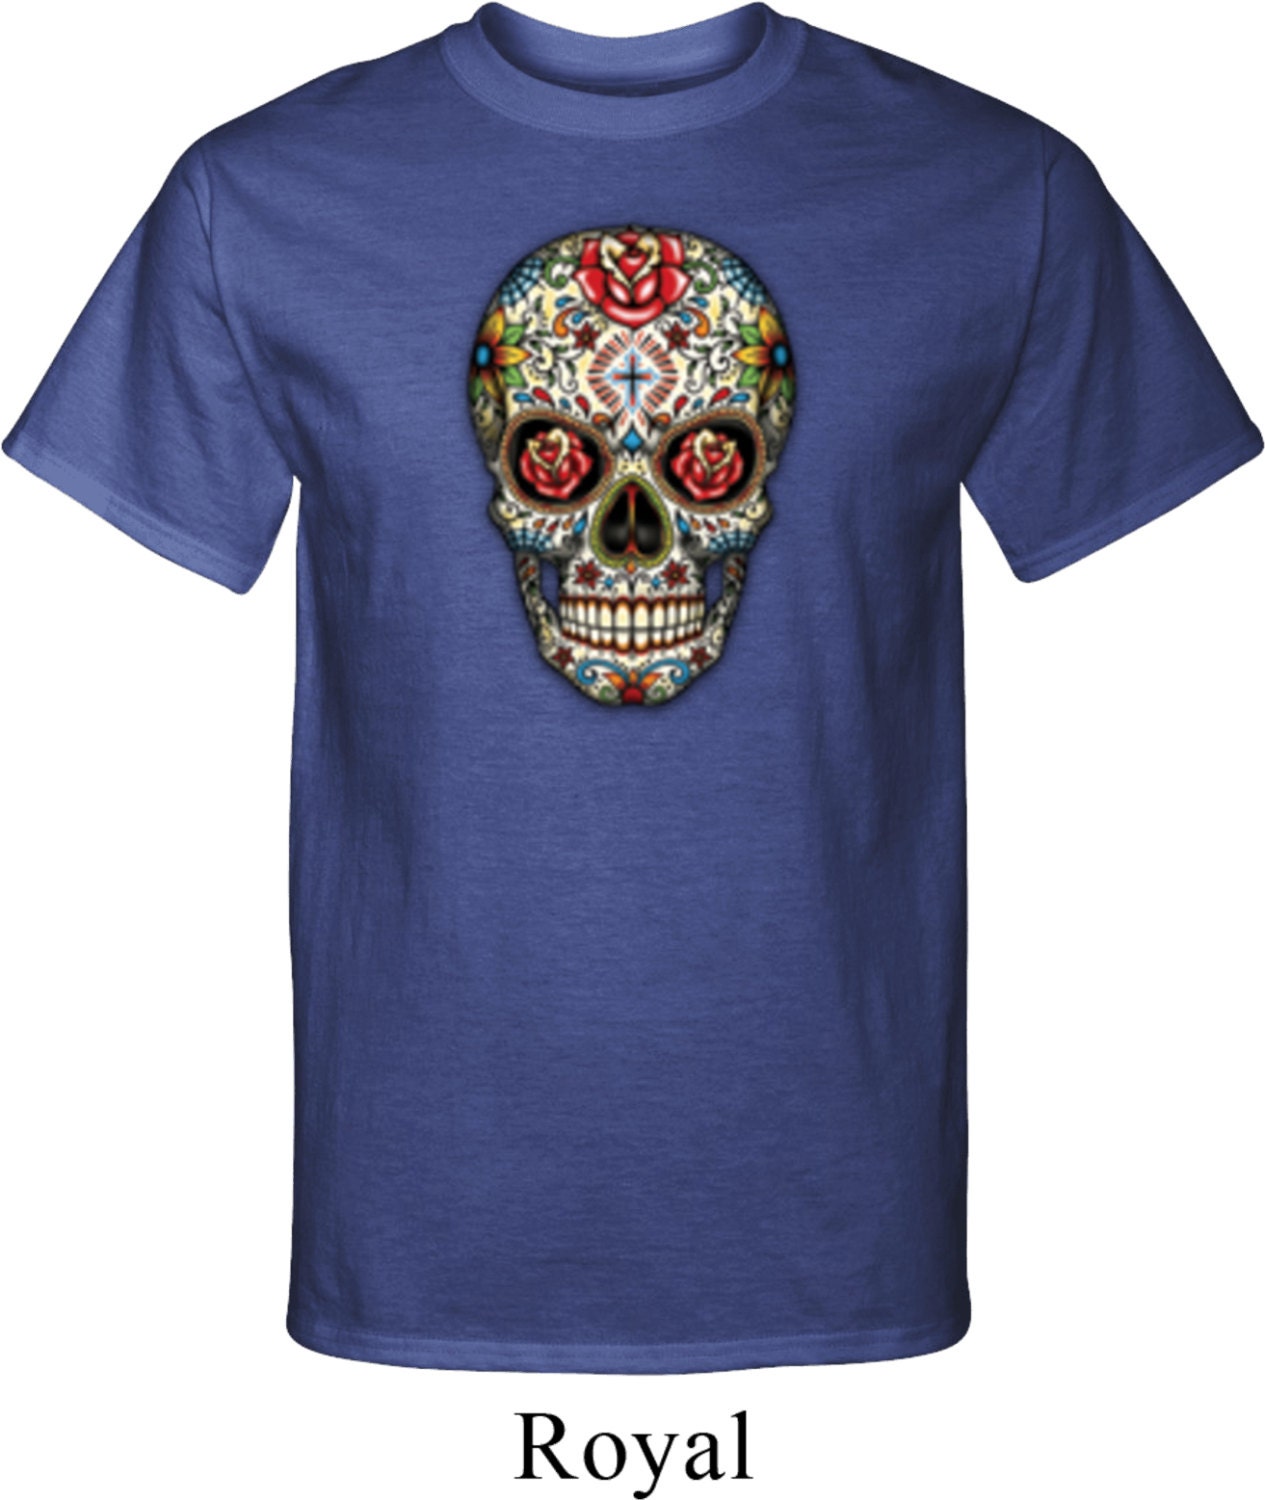 Sugar Skull With Roses Tall Tee T-shirt WS-16553-PC61T | Etsy